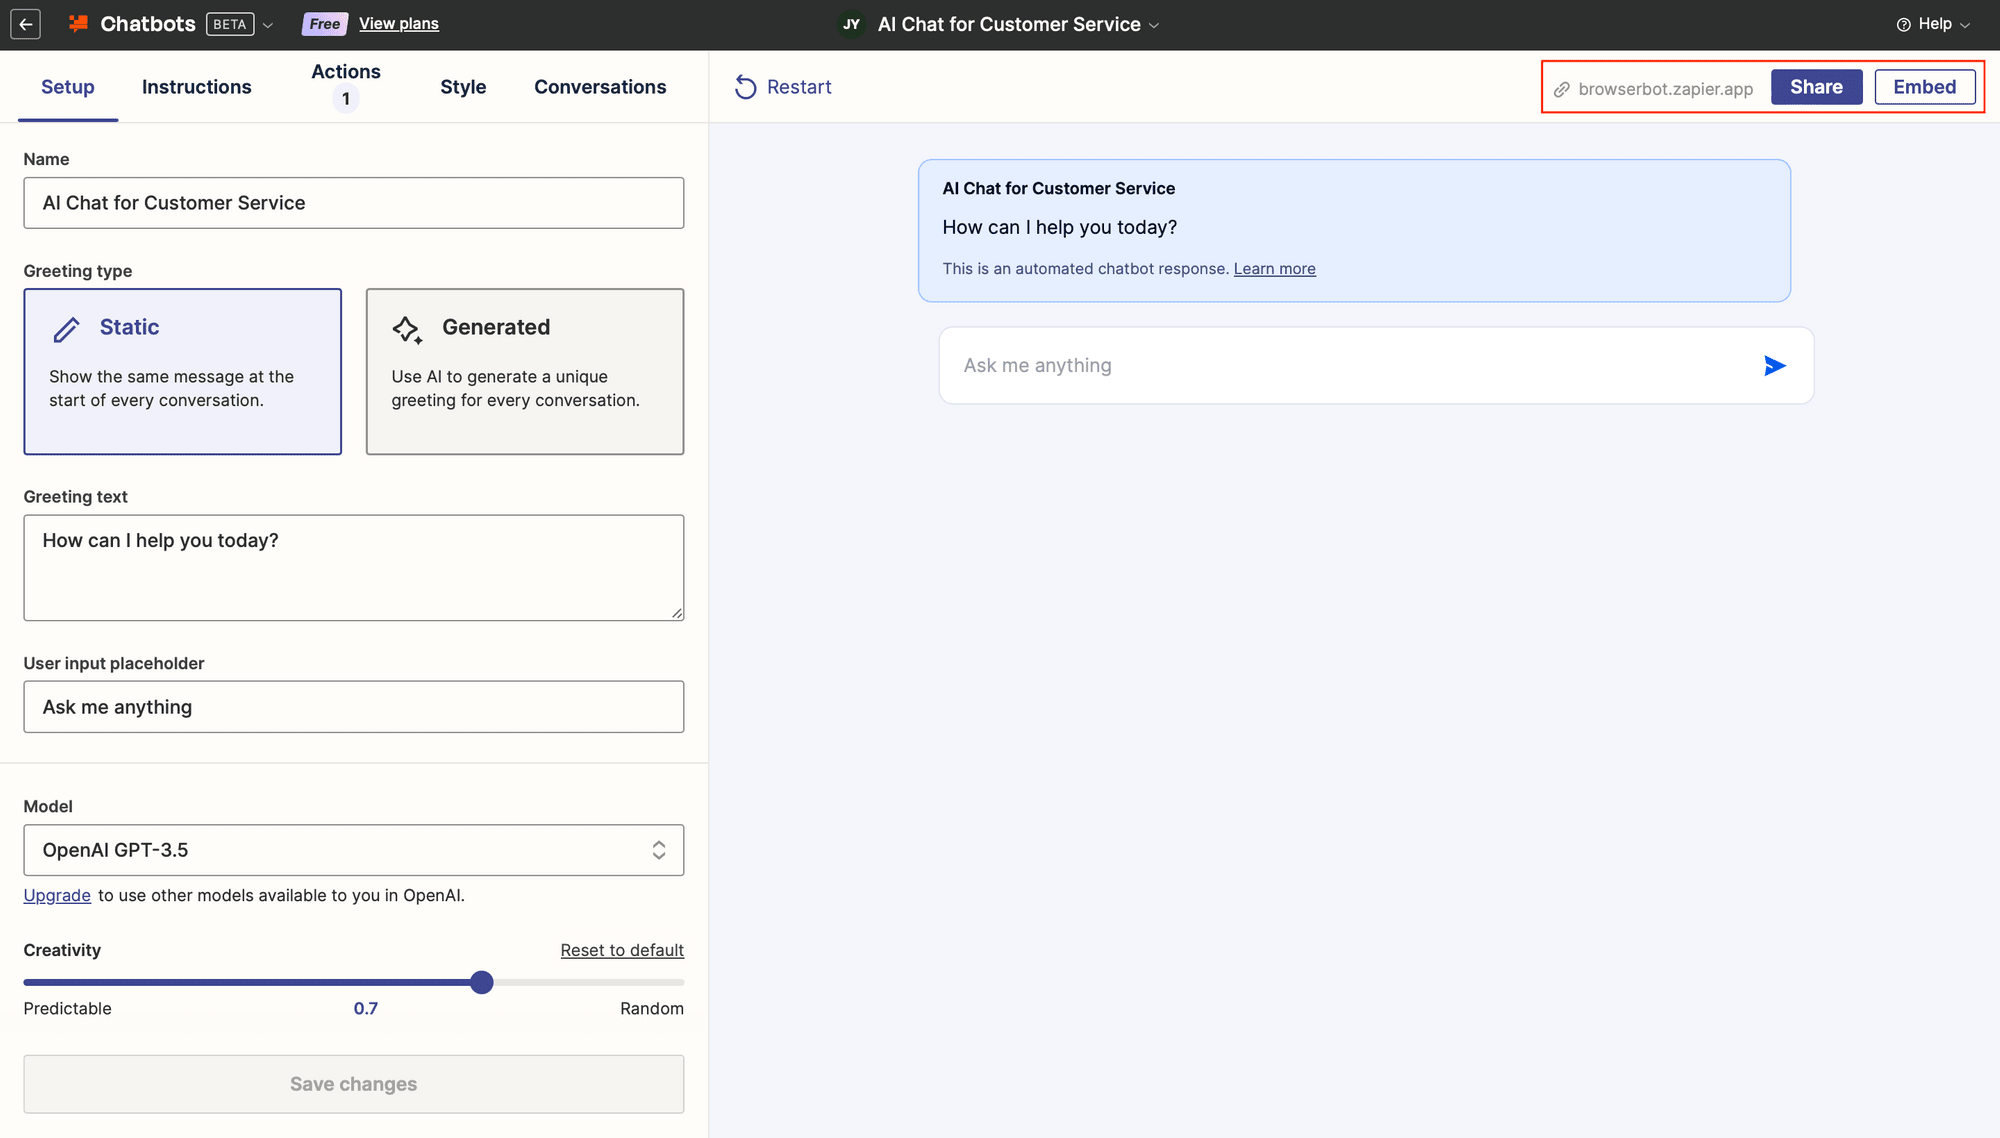 Screenshot of Zapier Chatbots editor with red box around sharing options